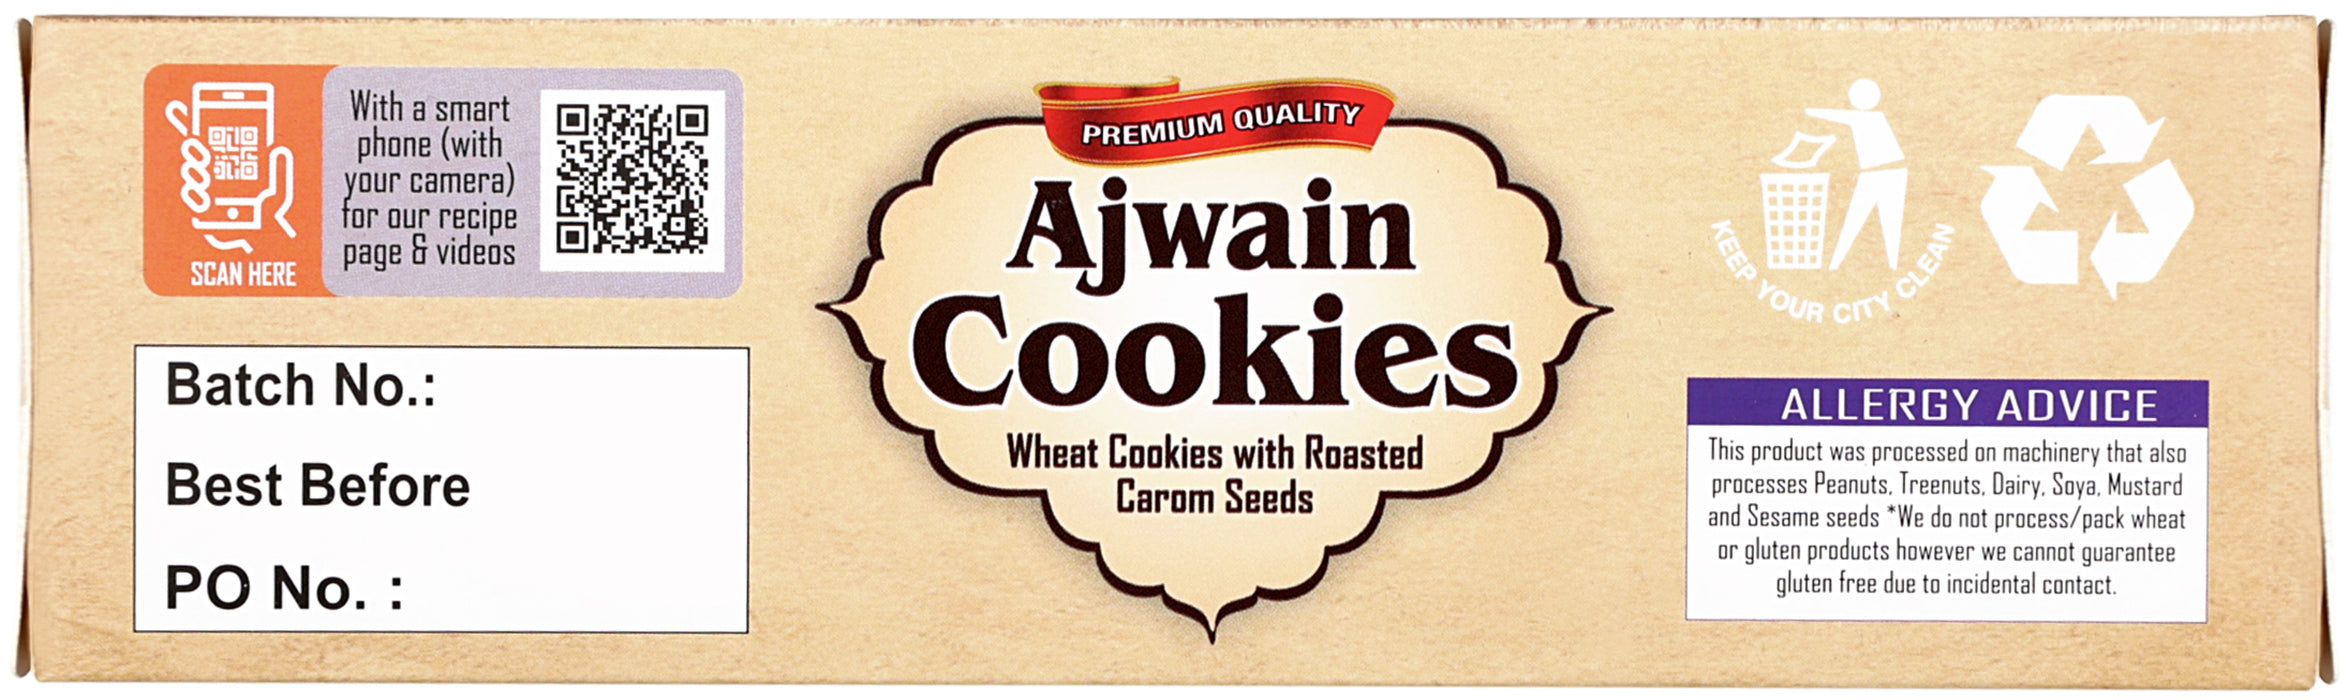 Rani Ajwain Cookies (Wheat Cookies with Roasted Carom Seeds) 14oz (400g) Pack of 3+1 FREE, Premium Quality Indian Cookies ~ All Natural | Vegan | Non-GMO | Indian Origin